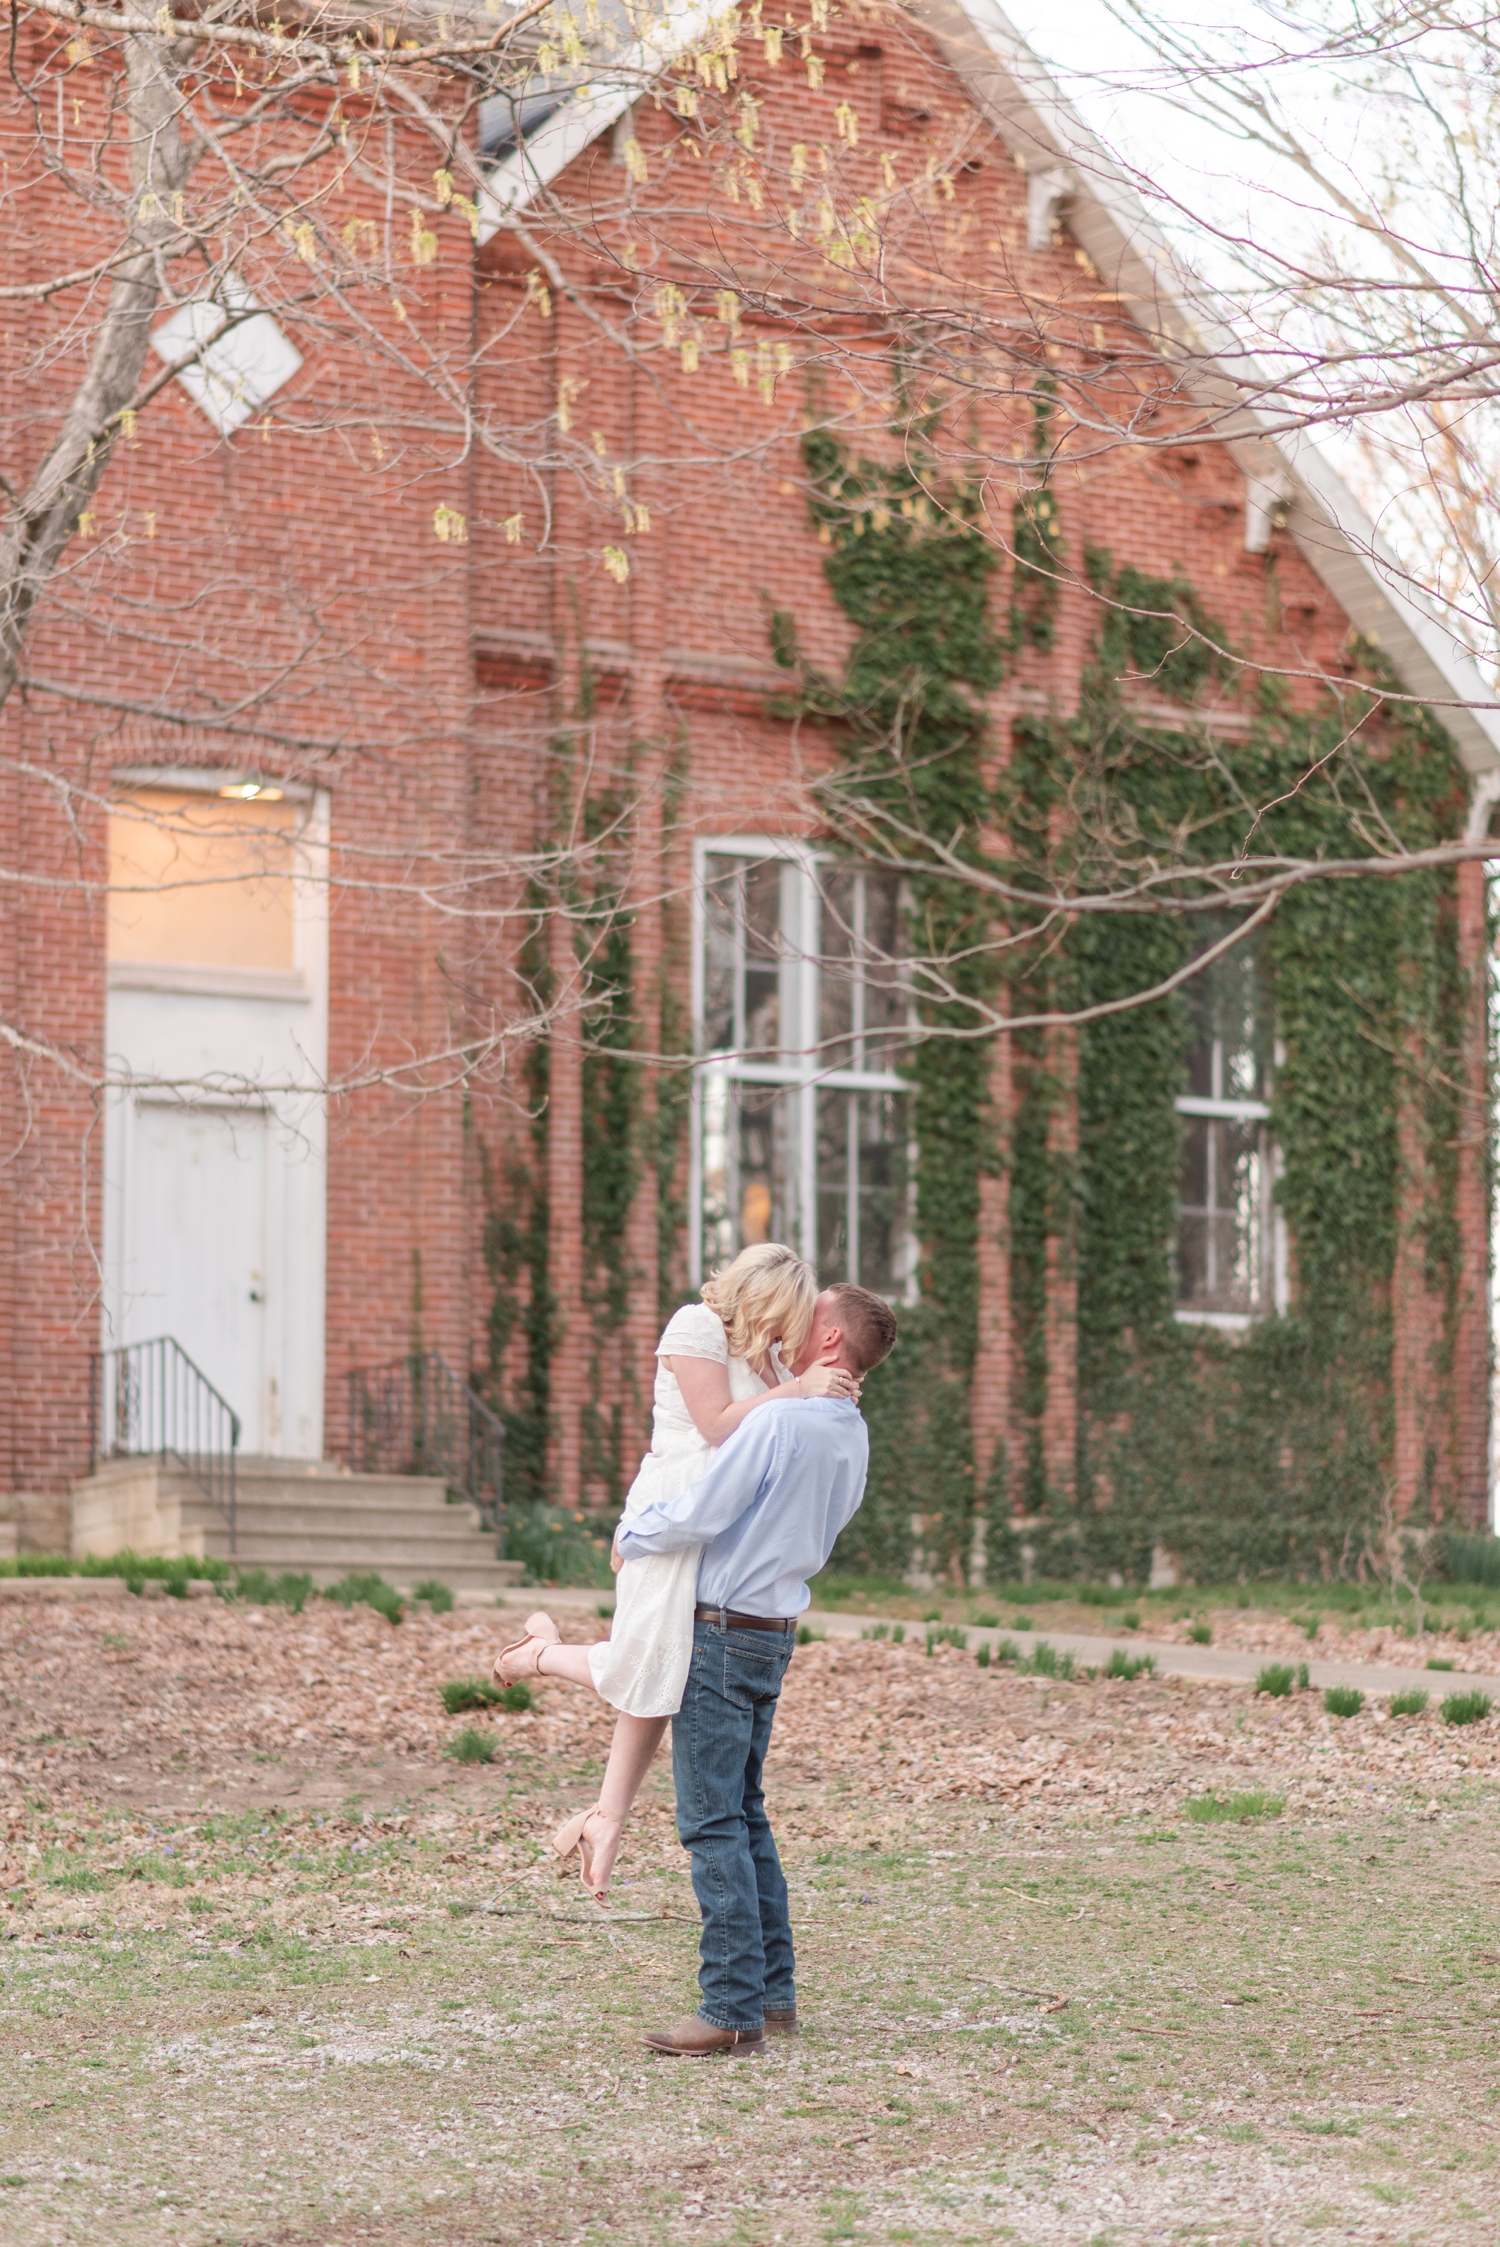 Spring Country Sunset Engagement Photos by Rose Courts Photography, Wedding Photographer in Indiana